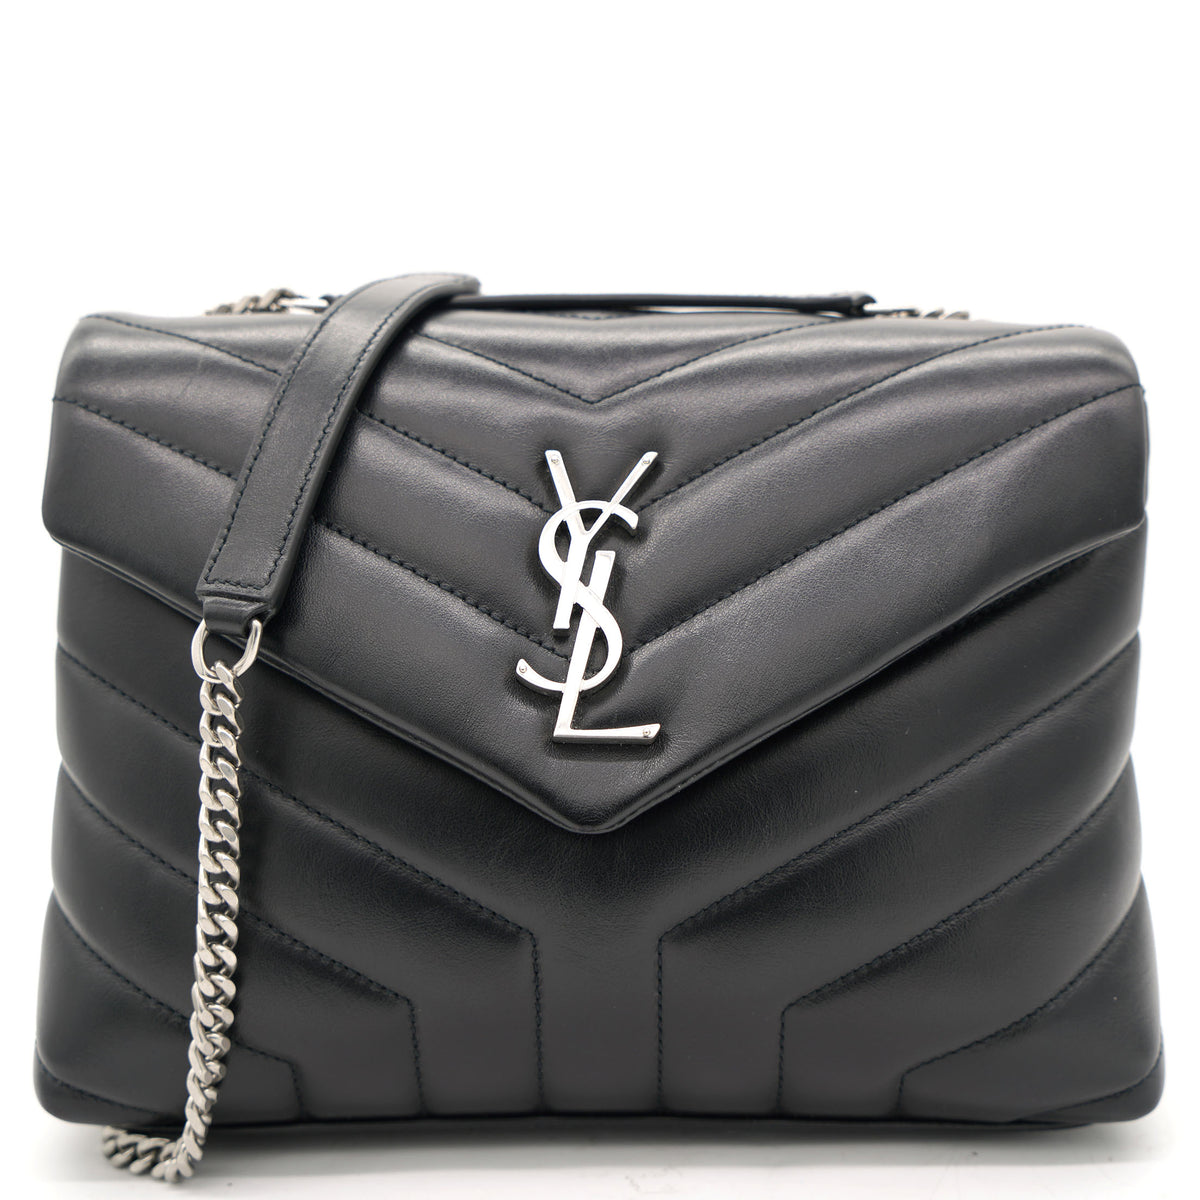 Saint Laurent - Puffer Ysl-logo Padded Leather Pouch - Womens - Black